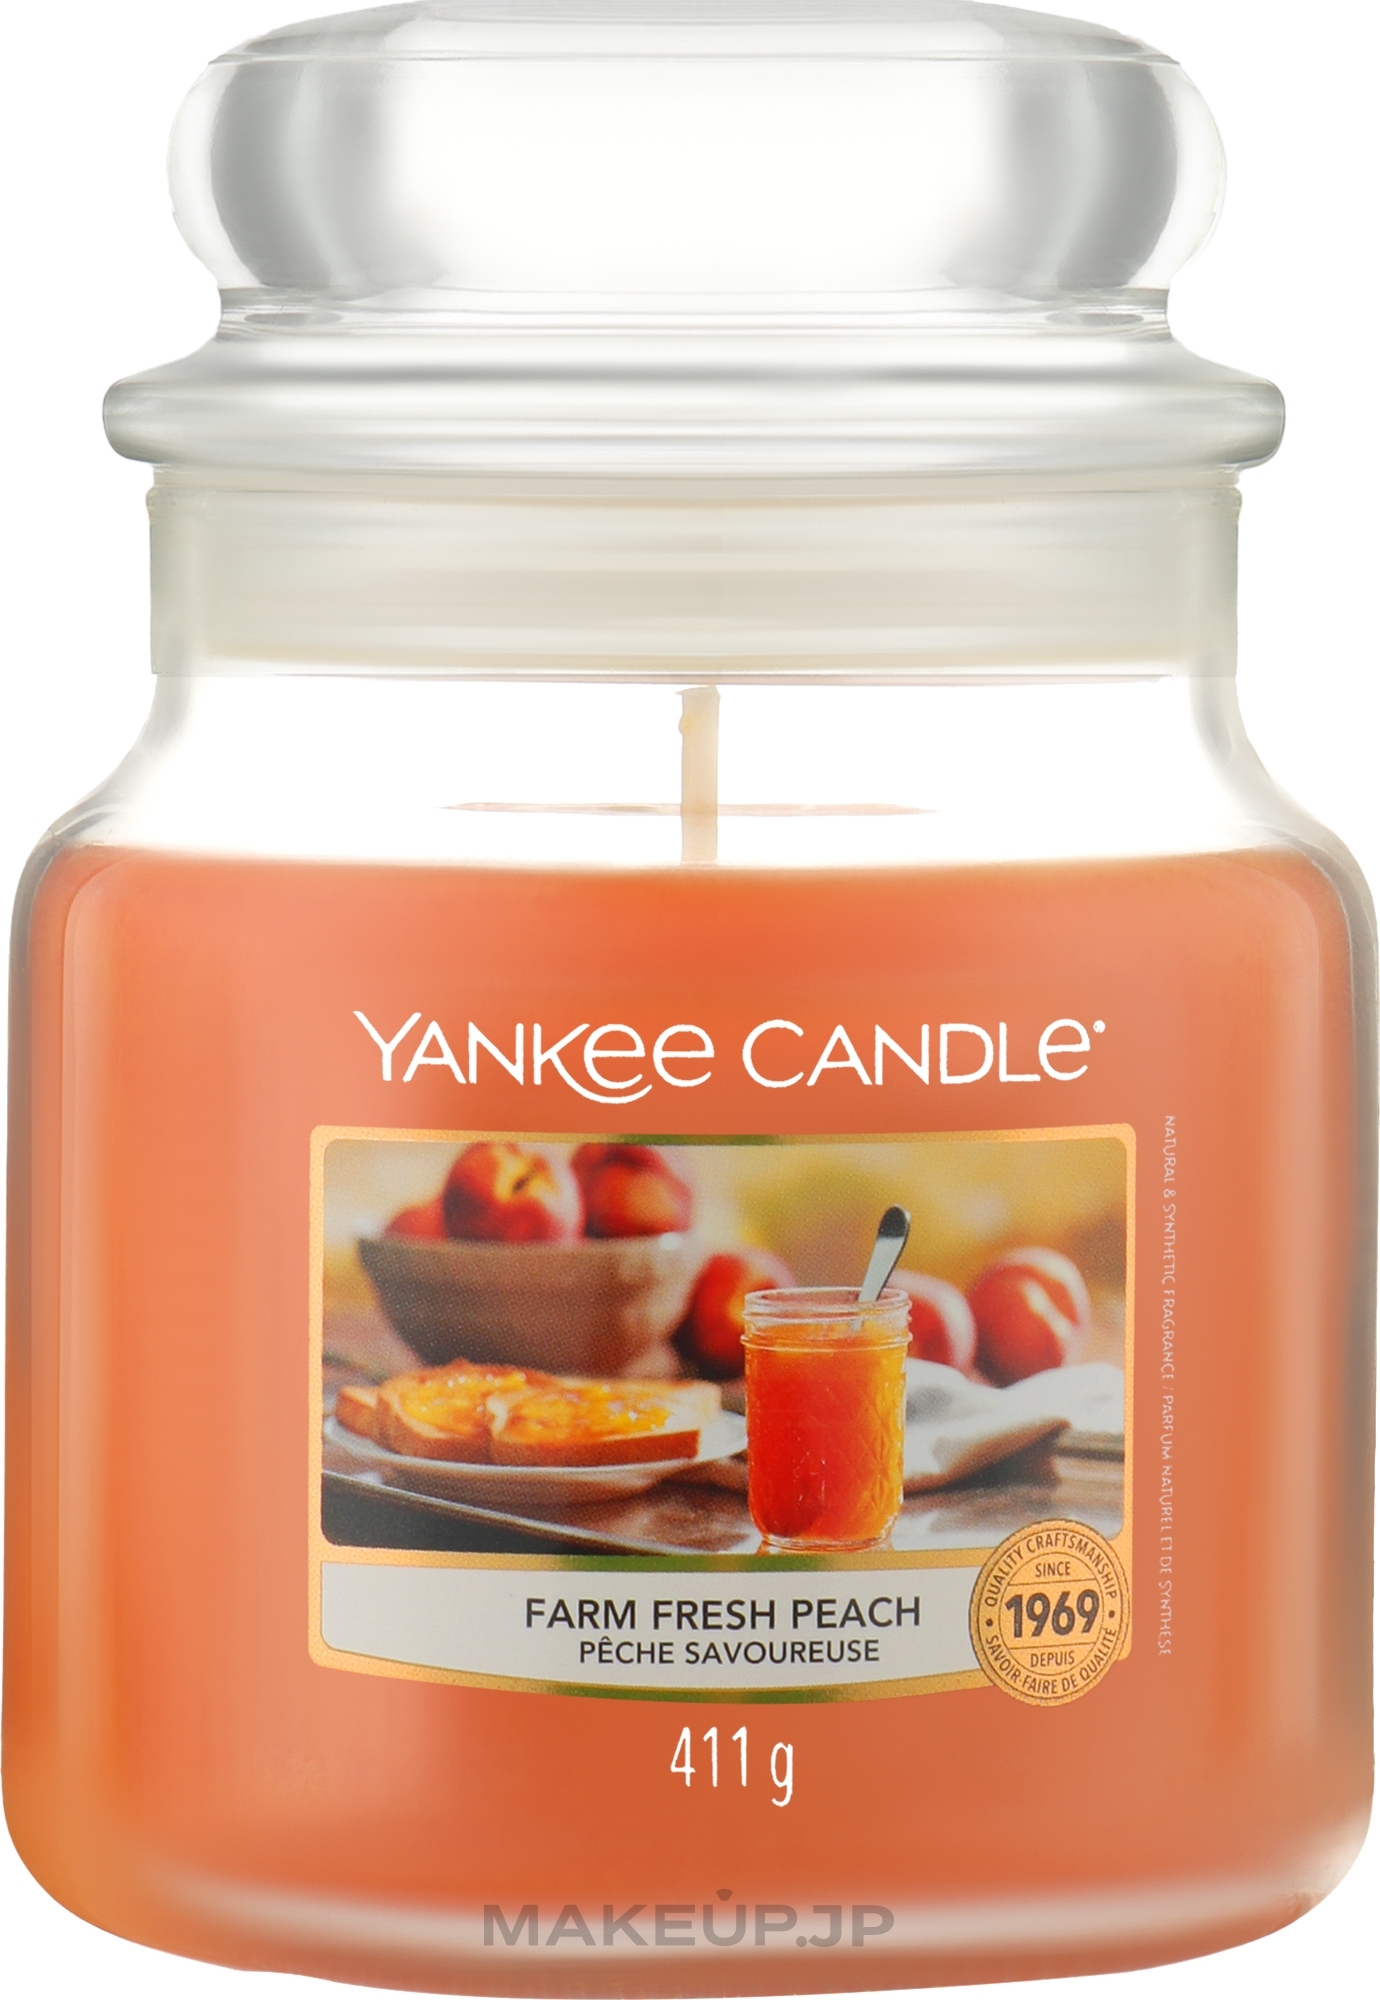 Scented Candle in Jar - Yankee Candle Farm Fresh Peach — photo 411 g